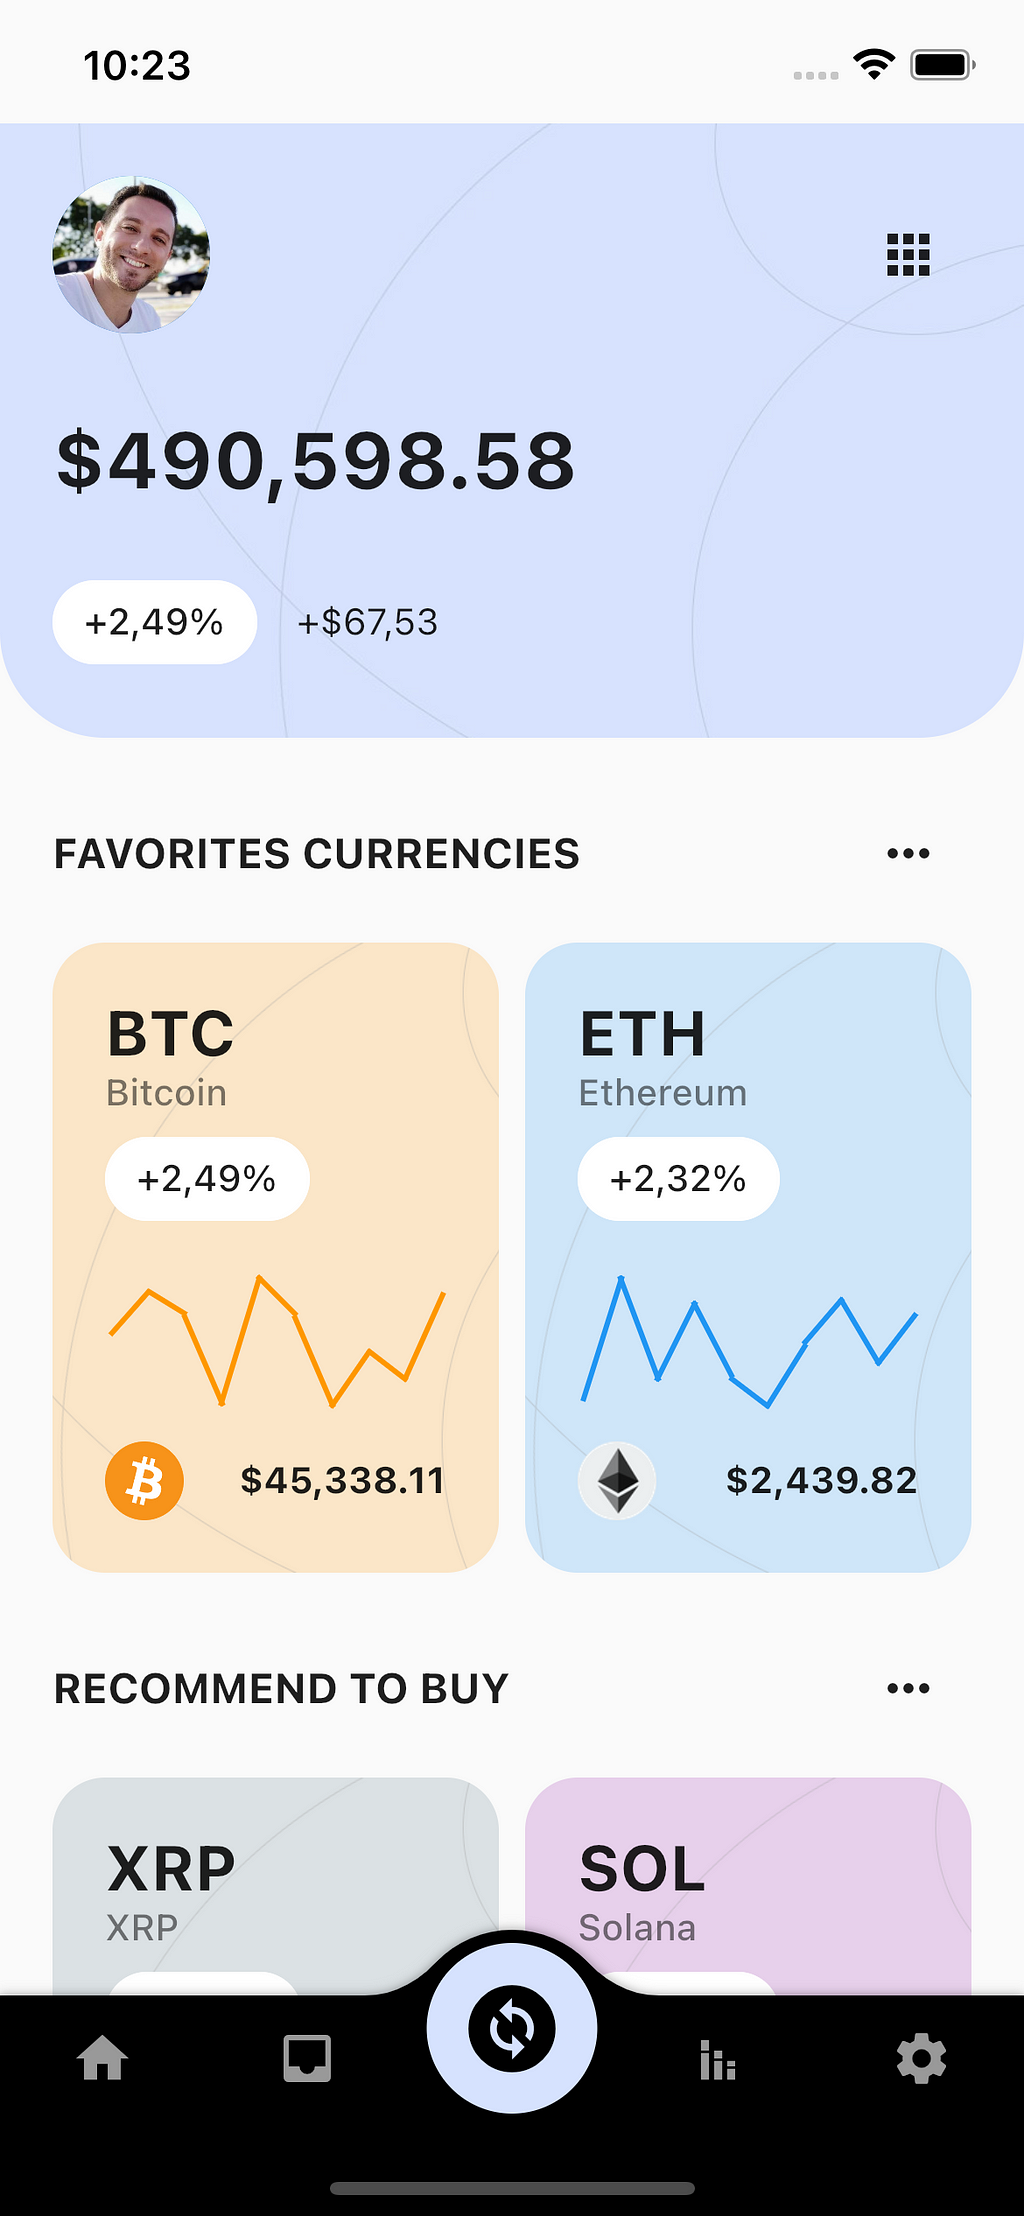 Home screen with user’s balance and their top crypto currencies.